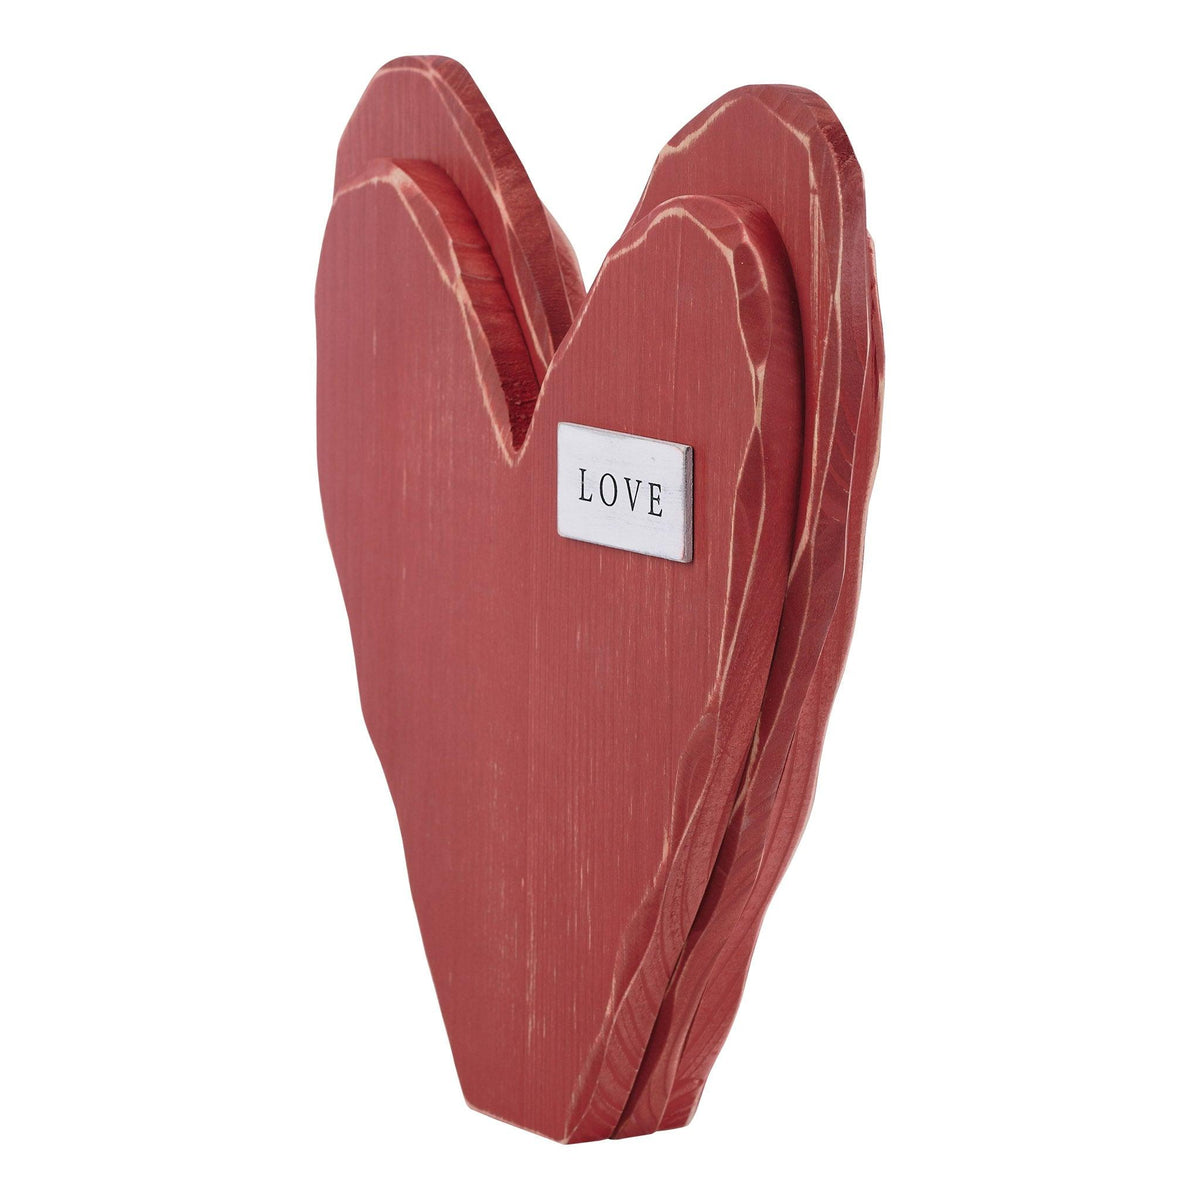 Wooden Heart Shape Photo Picture Frame Wood Carving Valentine Day